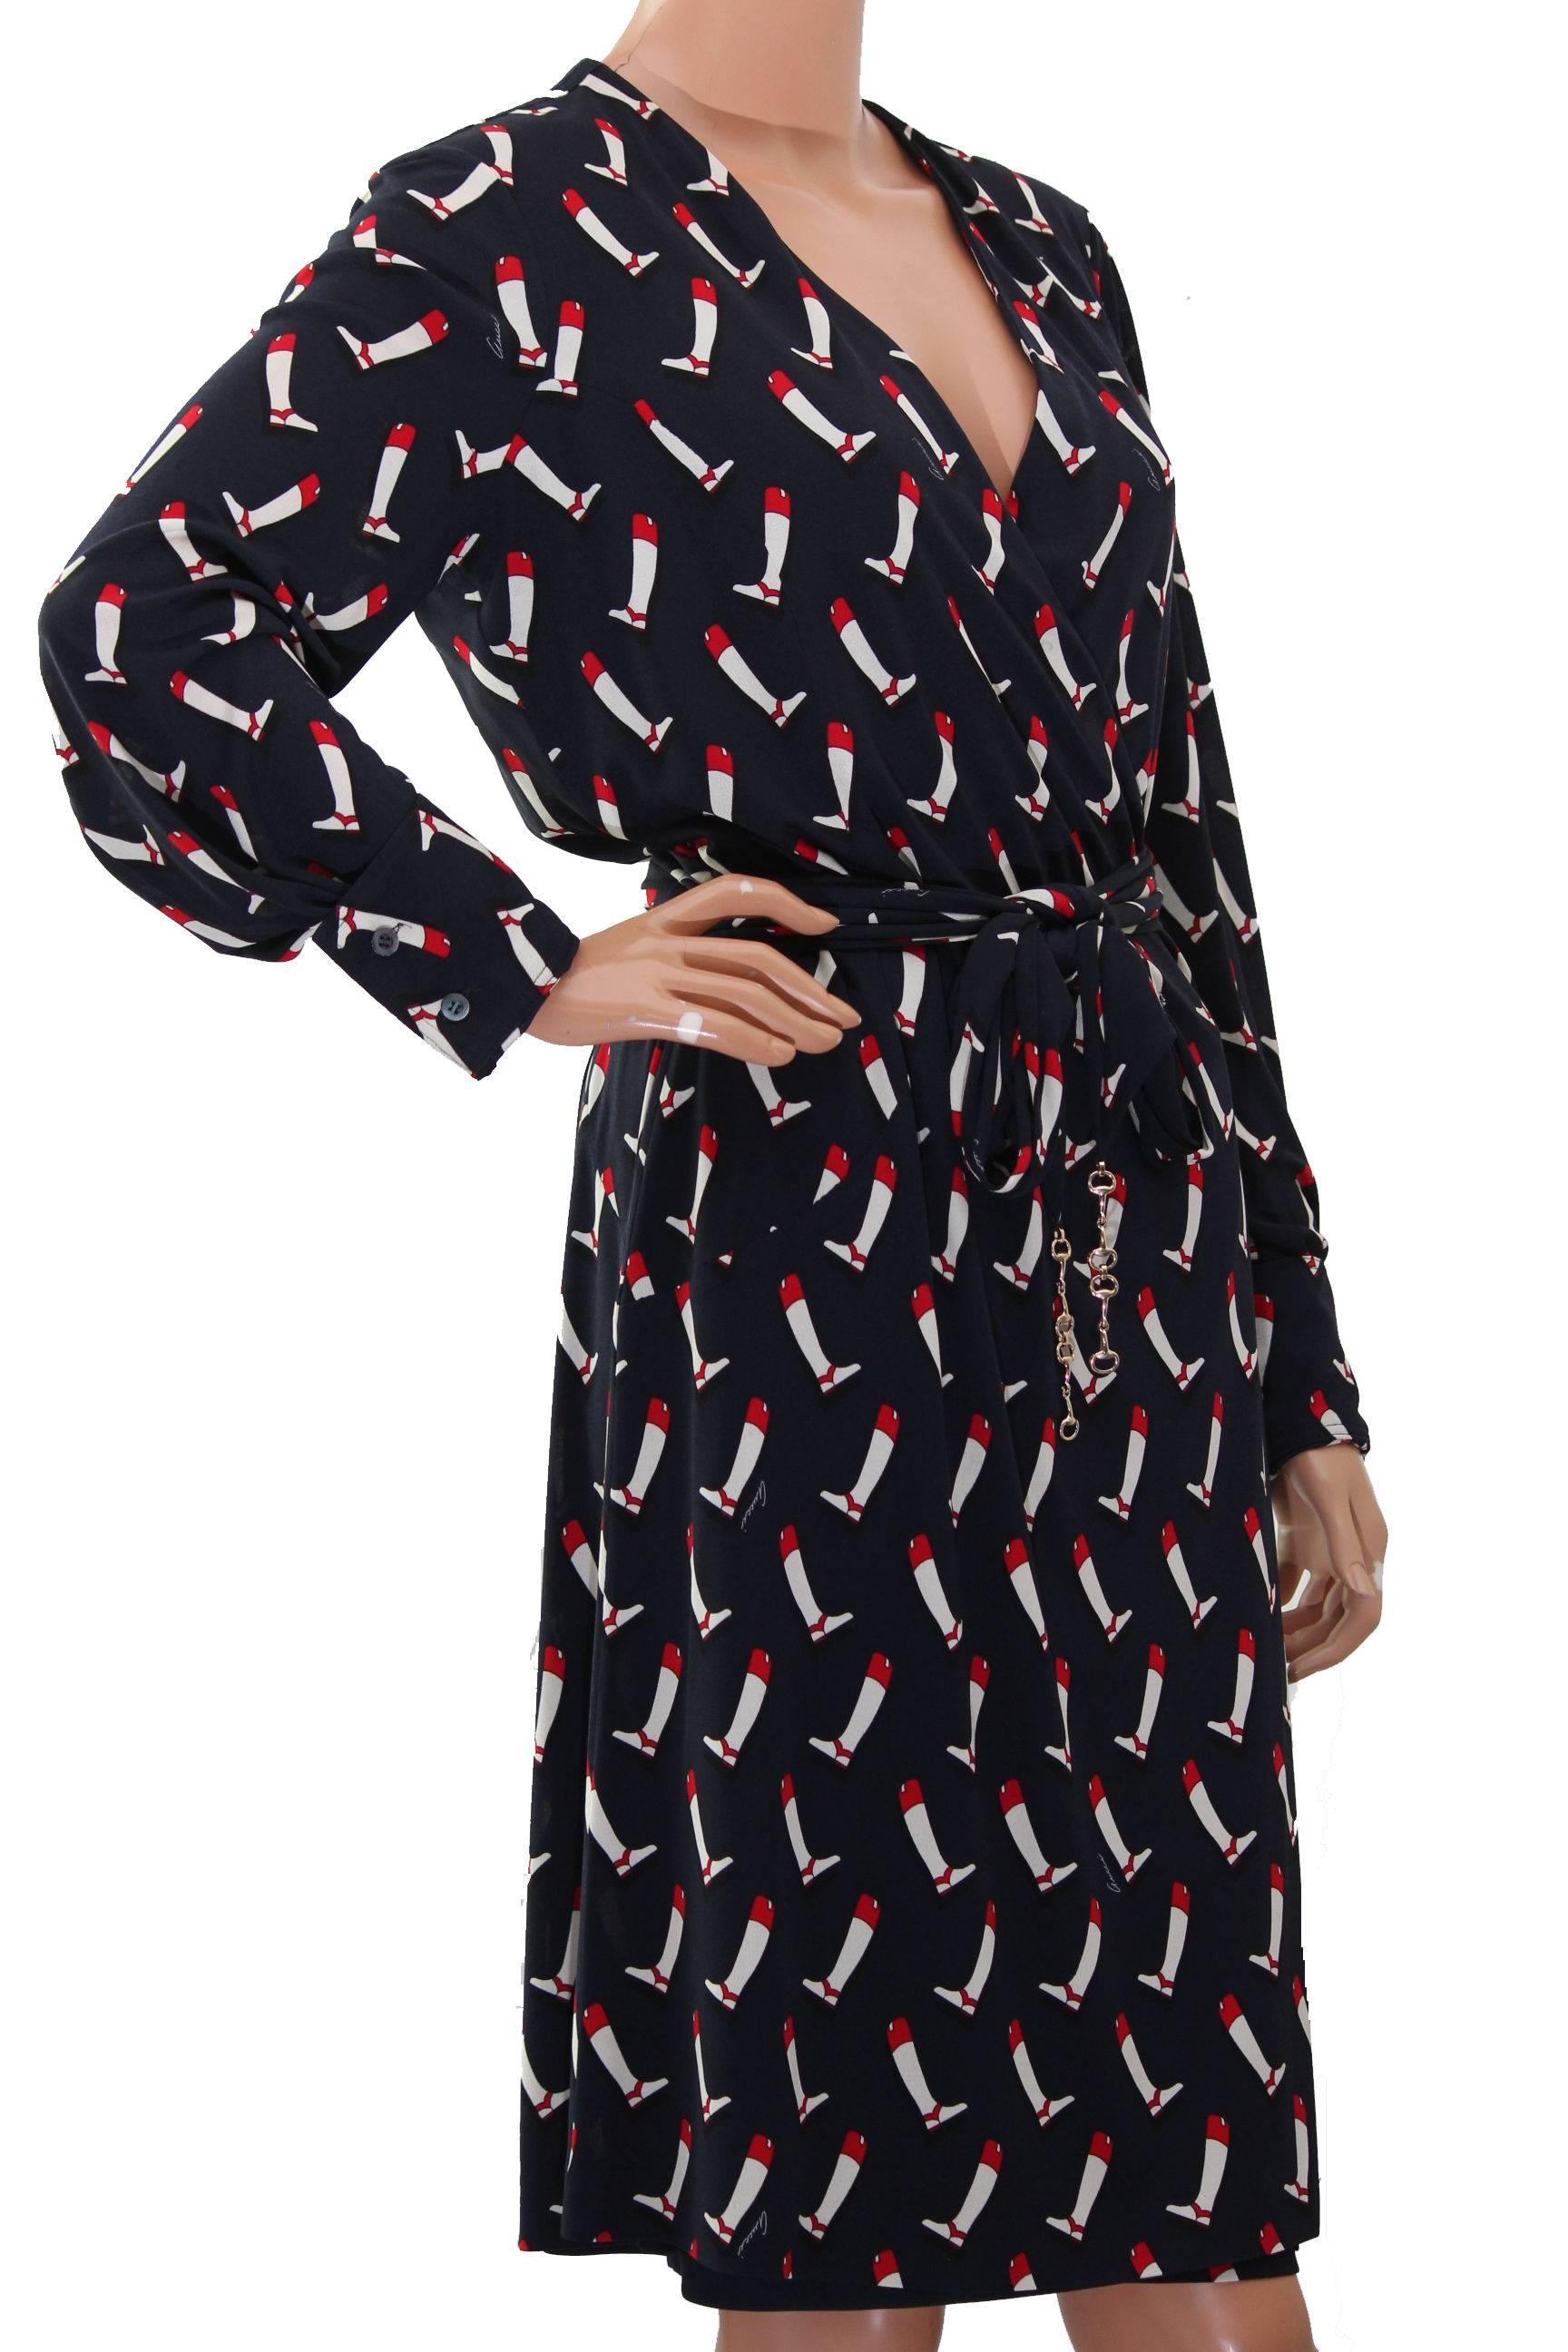 This vintage silk dress was made by Gucci and features a charming equestrian boot print on a navy background.  Wrap style, it fastens with small buttons and cinches with an attached silk belt and metal horse bit closure.  Lined in lightweight silk. 